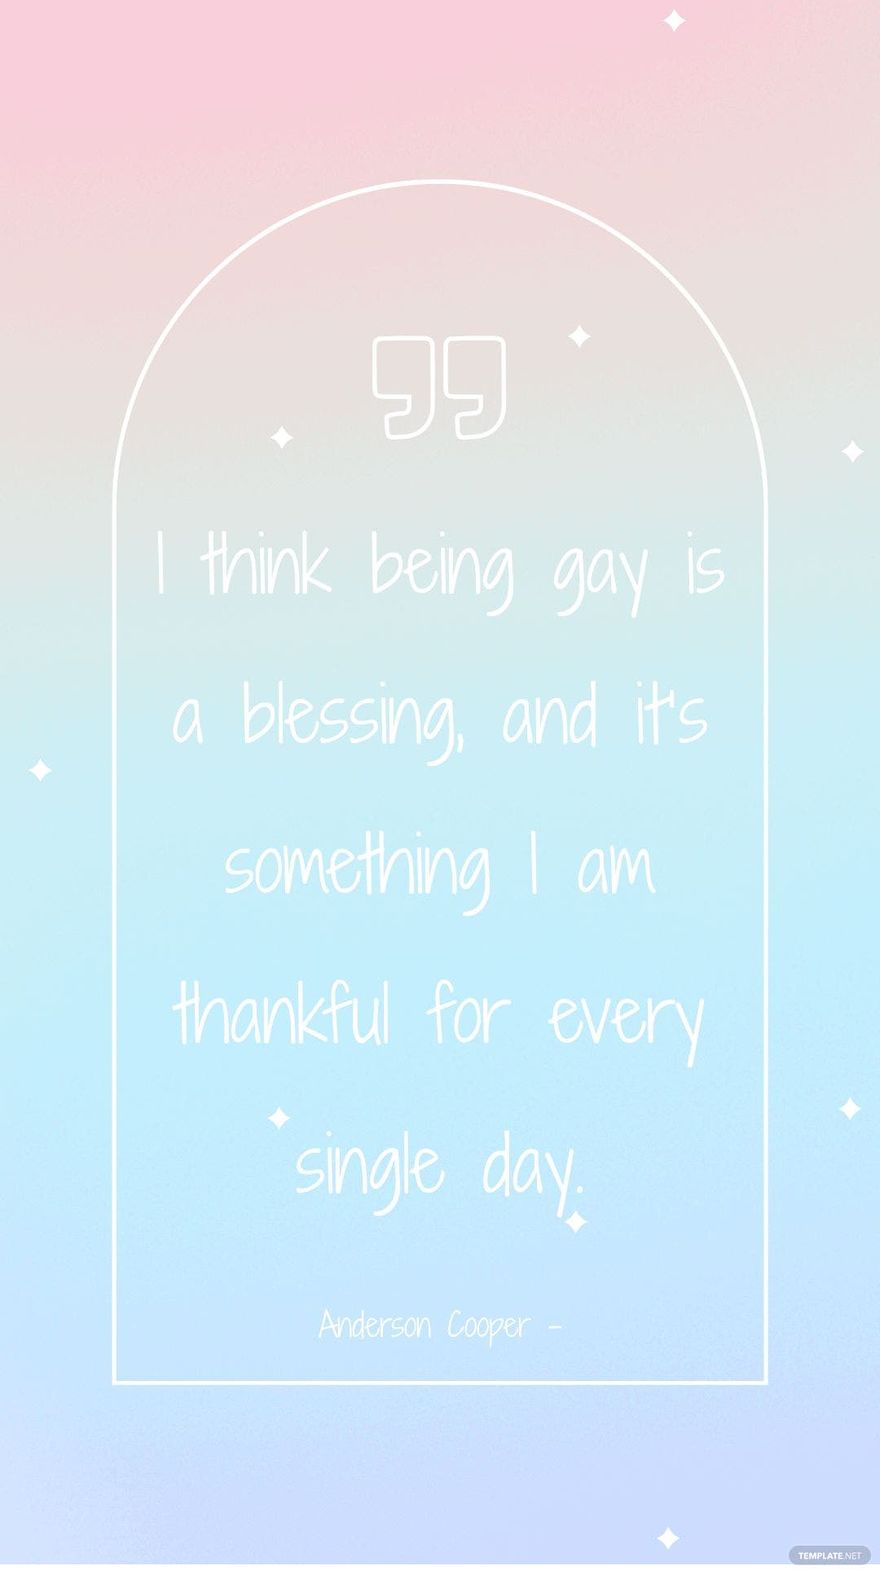 Anderson Cooper - I think being gay is a blessing, and it’s something I am thankful for every single day.